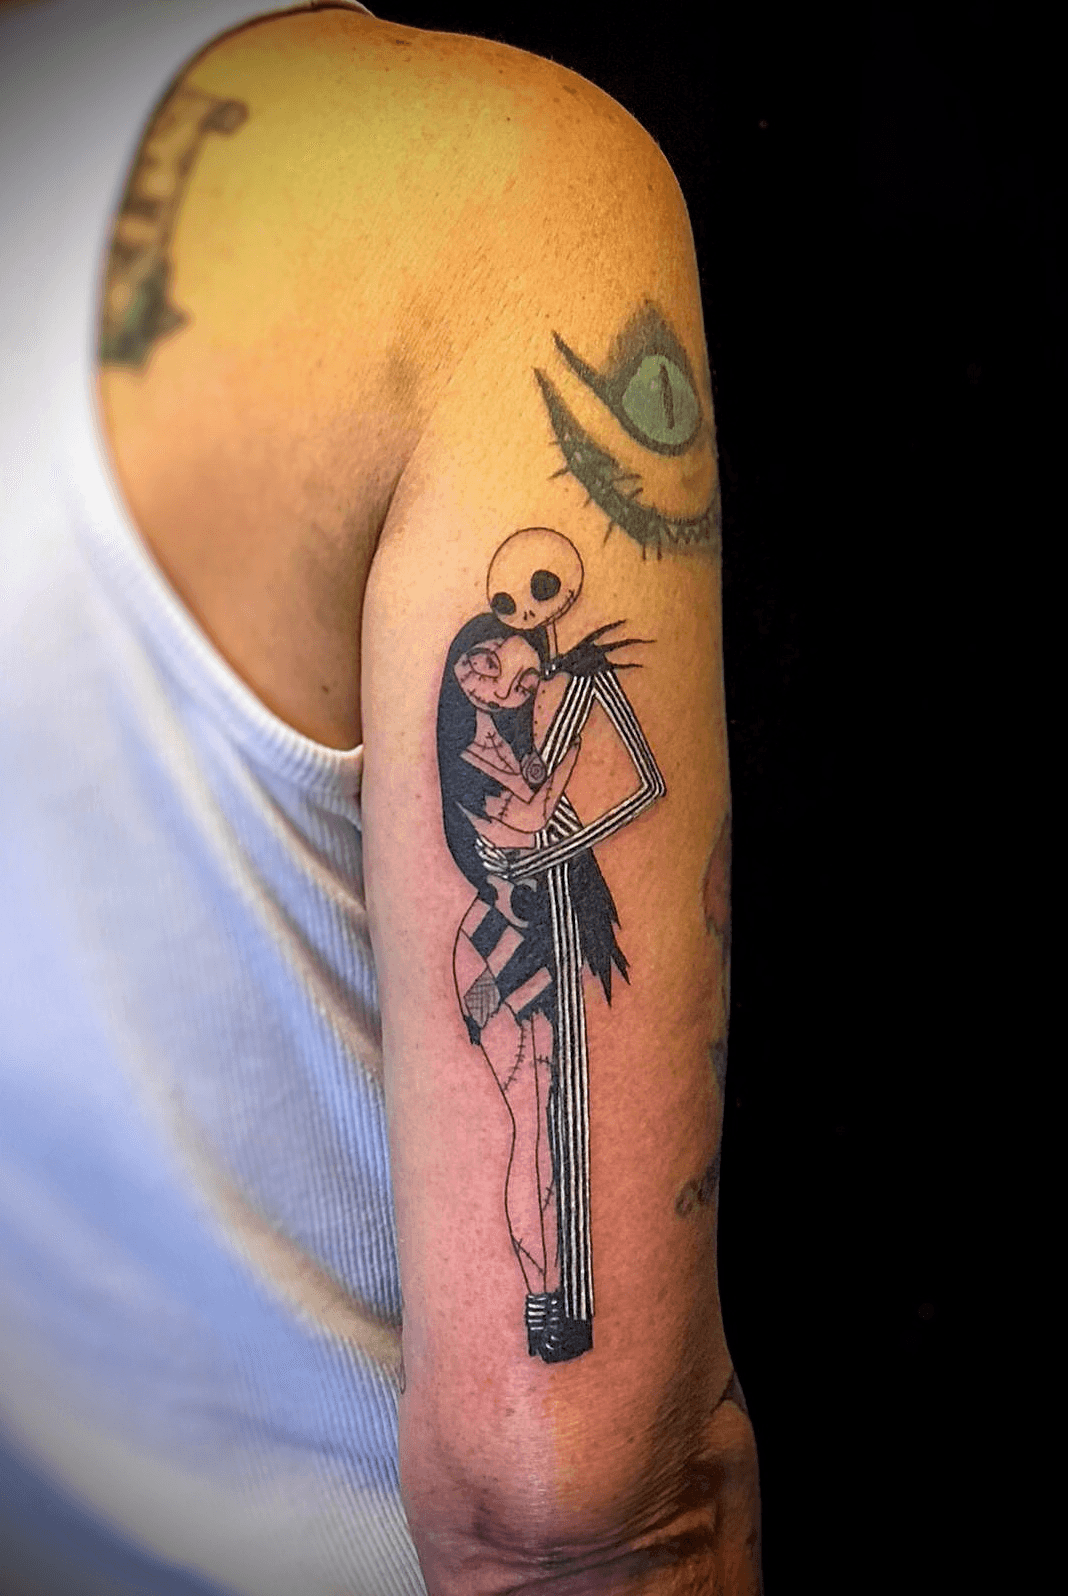 Summit Tattoo And Piercing  Jack and Sally couple tattoo by Nick McQueen   Facebook